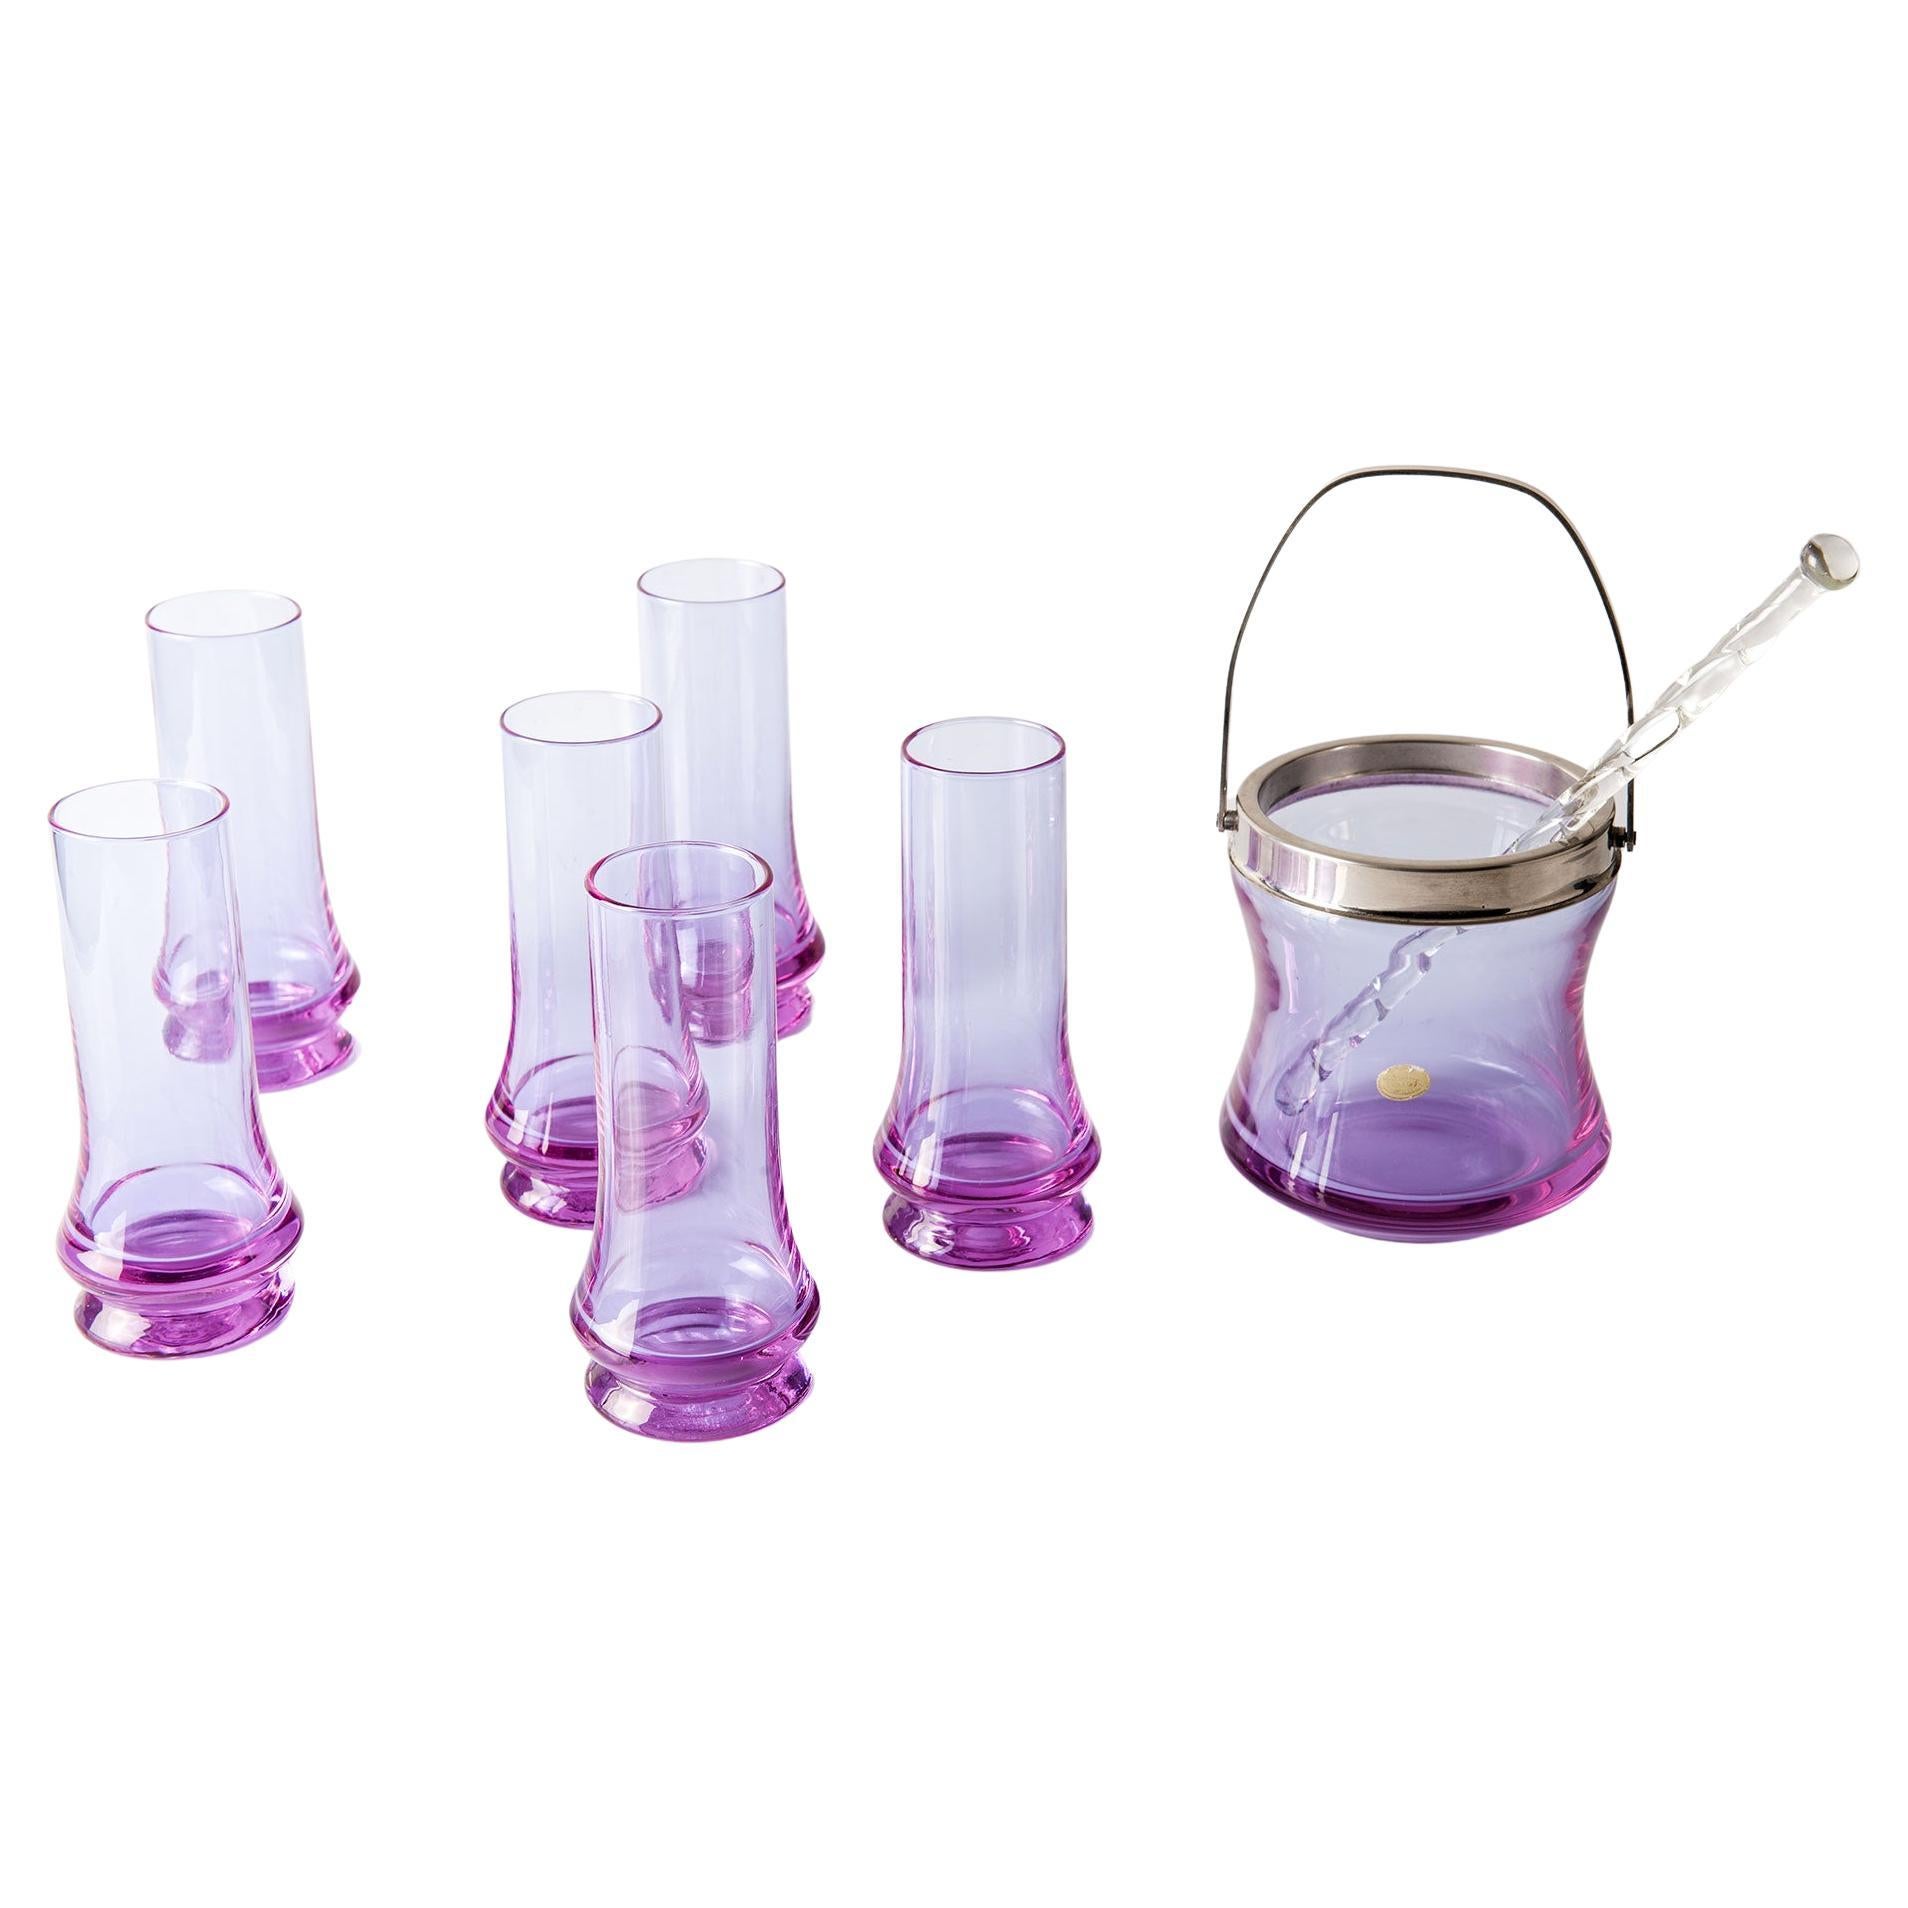 Cocktail Glass Set- Ice Bucket, Stirrer, 6 Glasses by Cristallerie Si.An., Italy For Sale